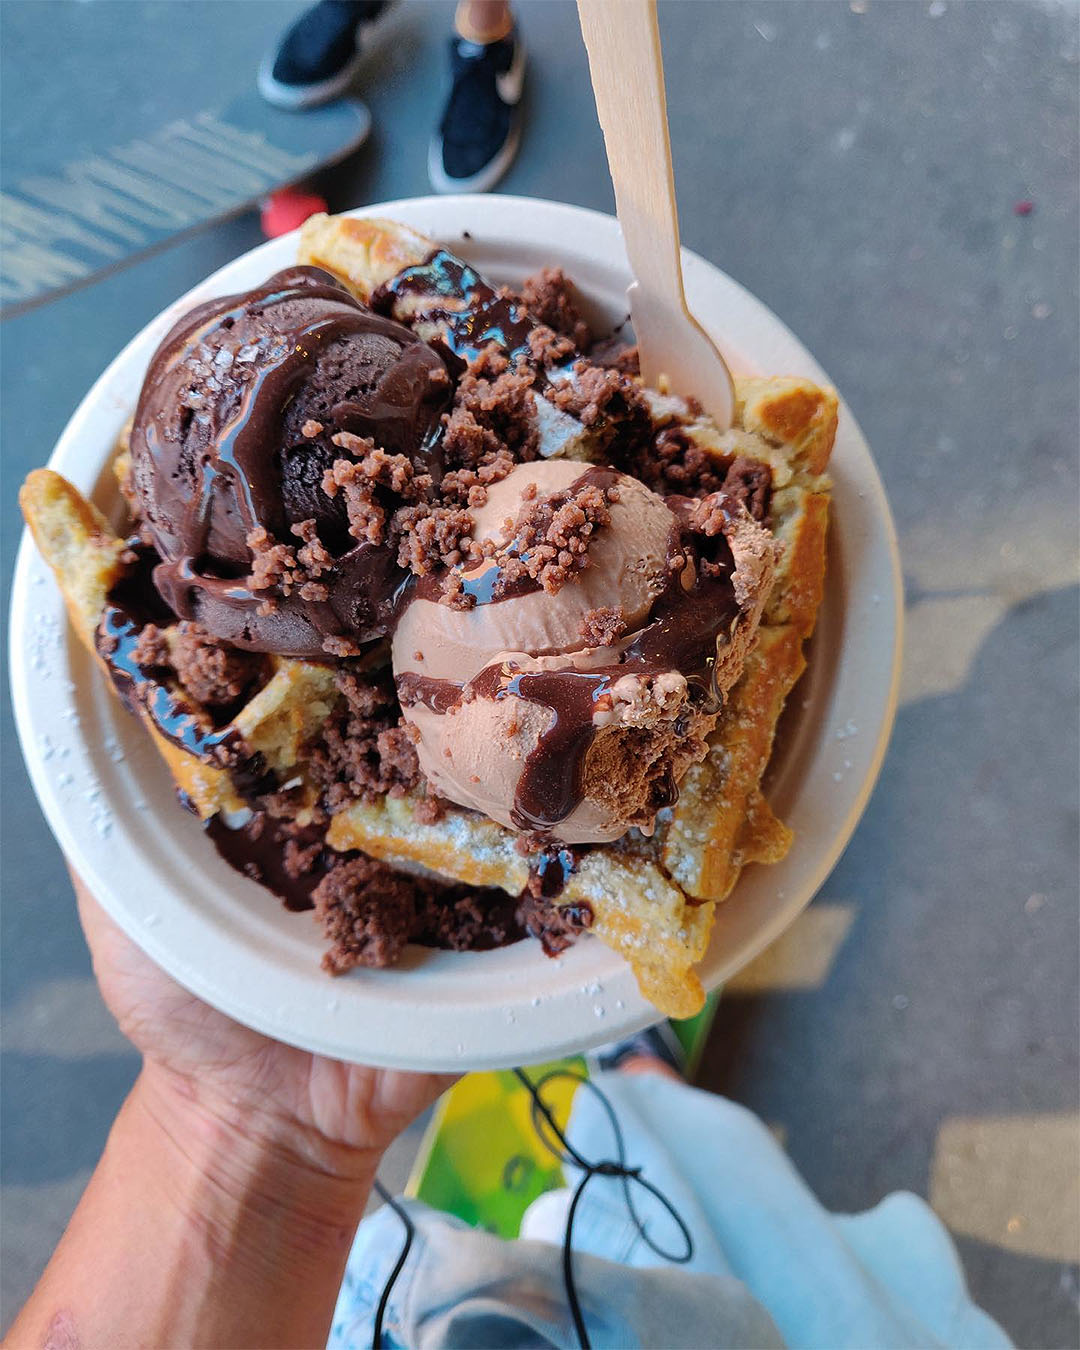 Heaping ice cream on delicious looking waffles at Utopia Ice in Christchurch.